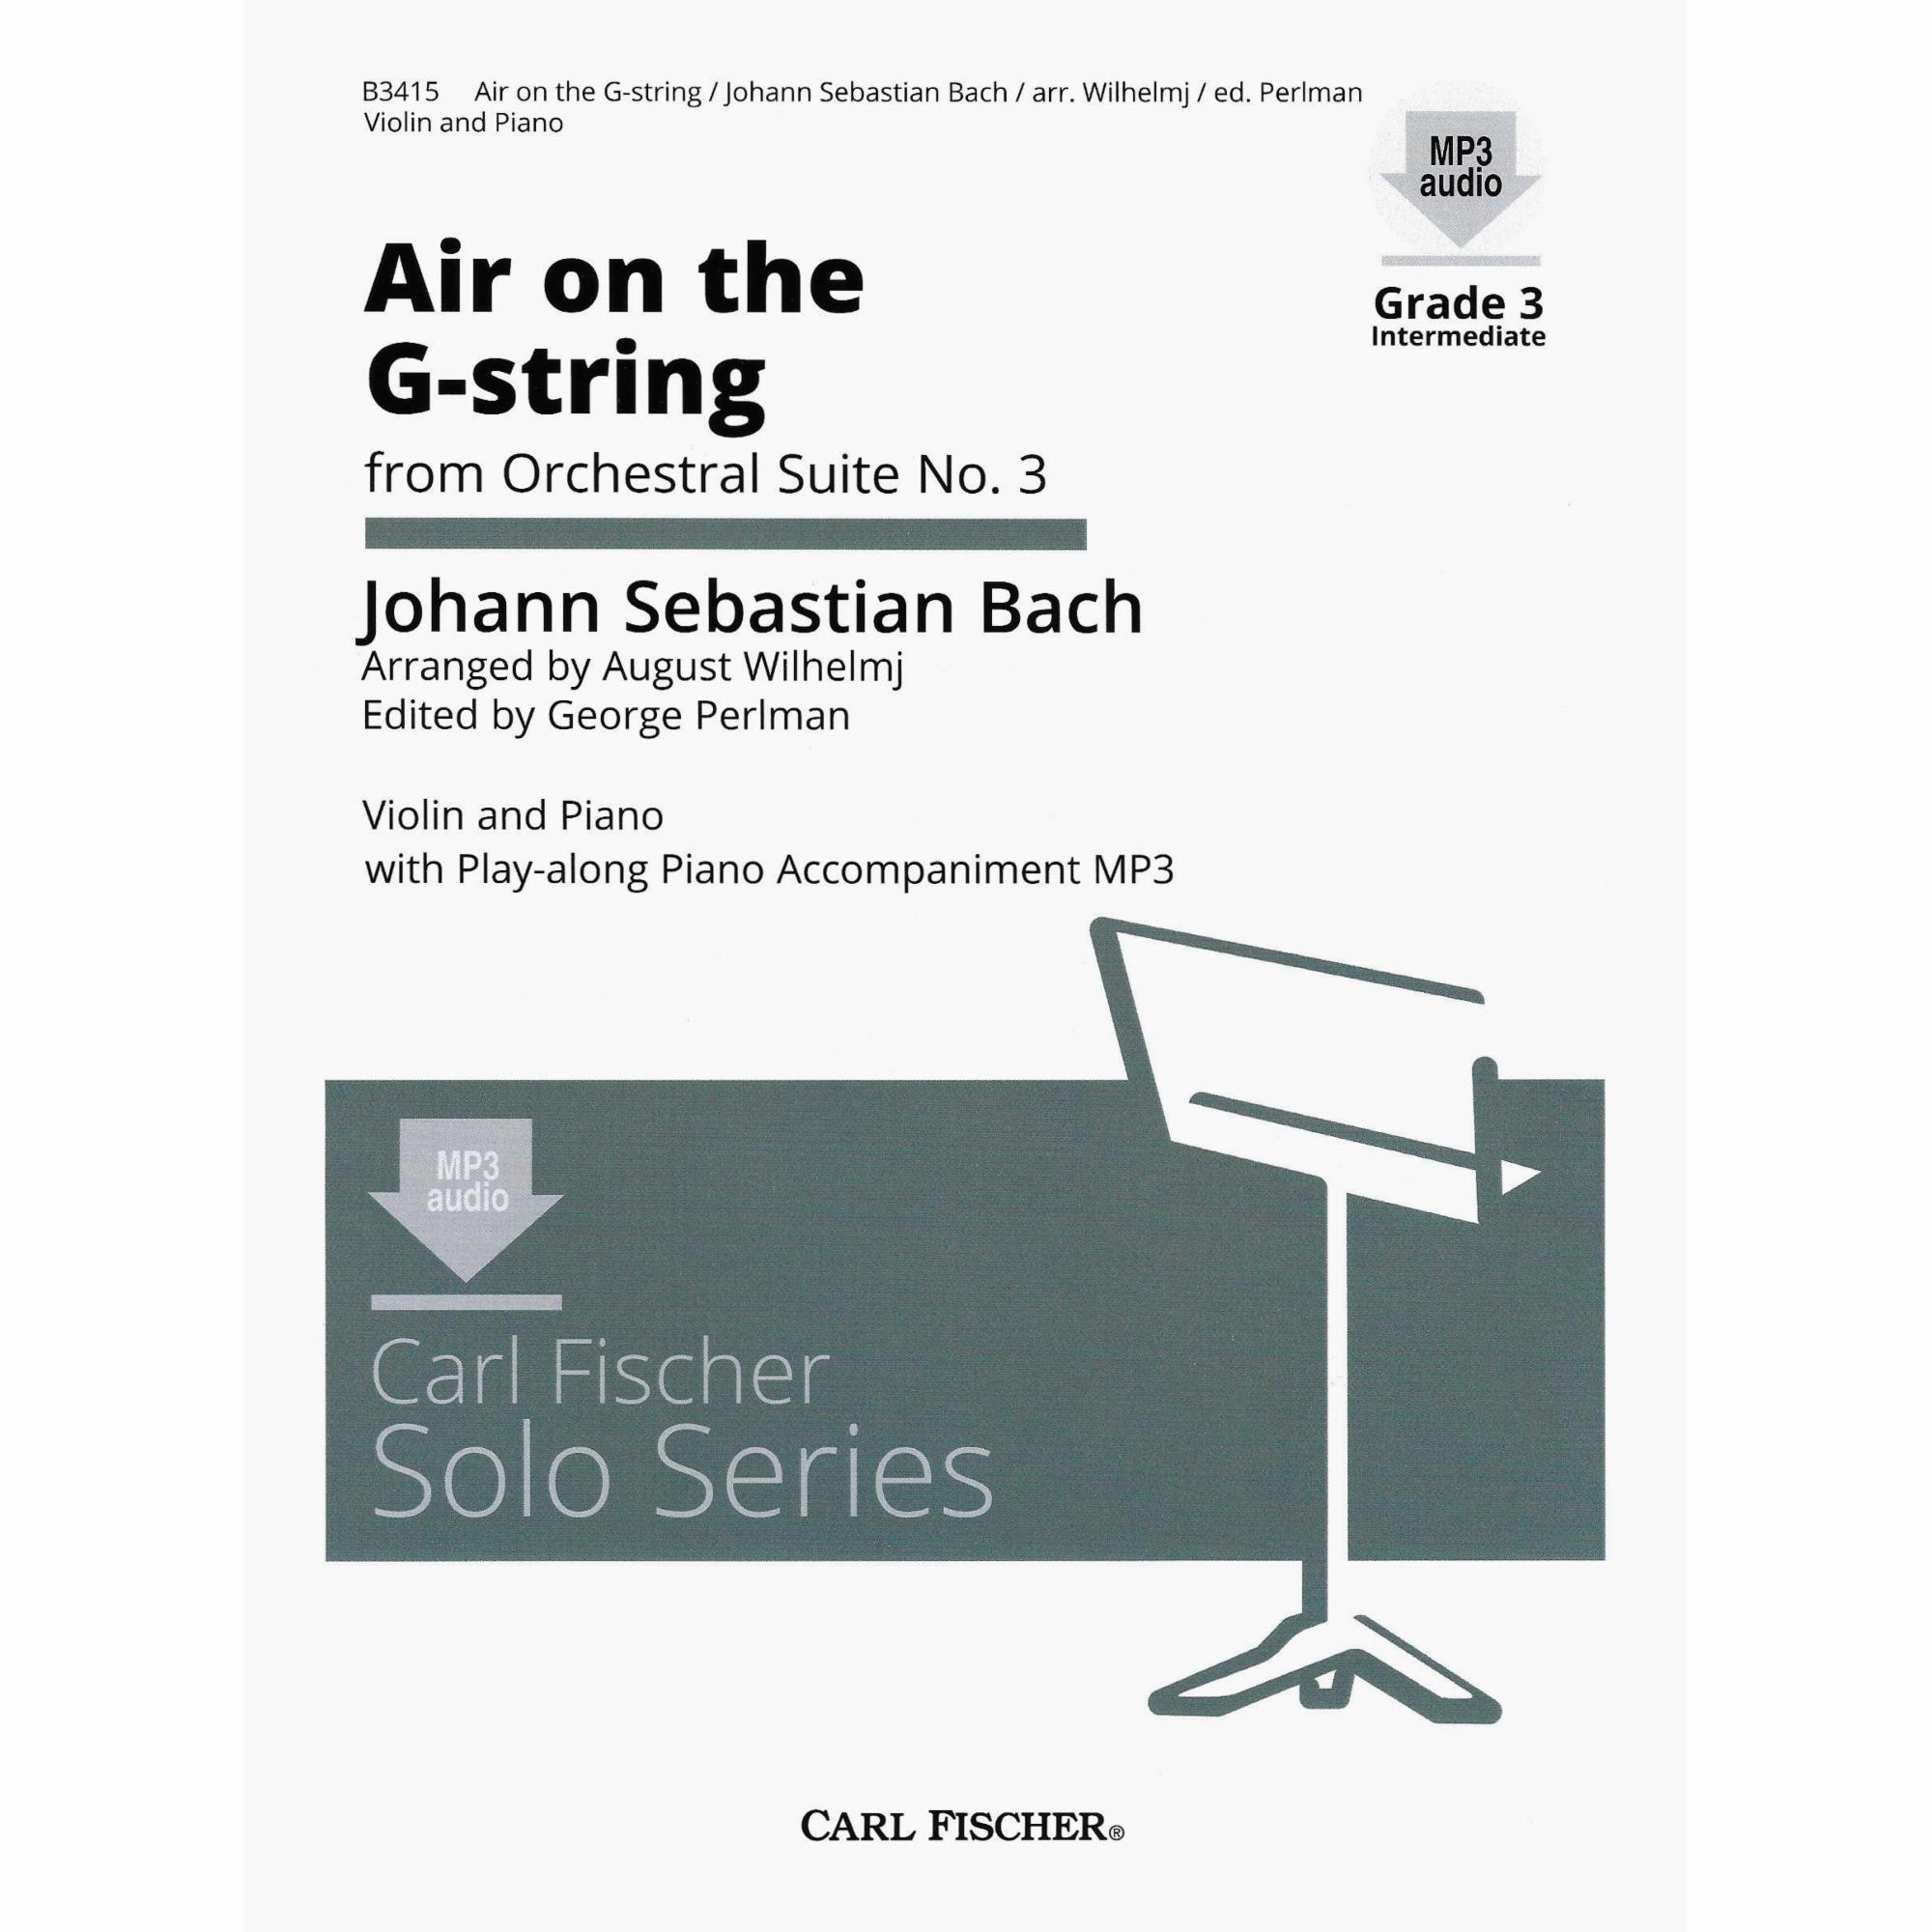 Bach -- Air on the G-string, from Orchestral Suite, No. 3 for Violin and Piano